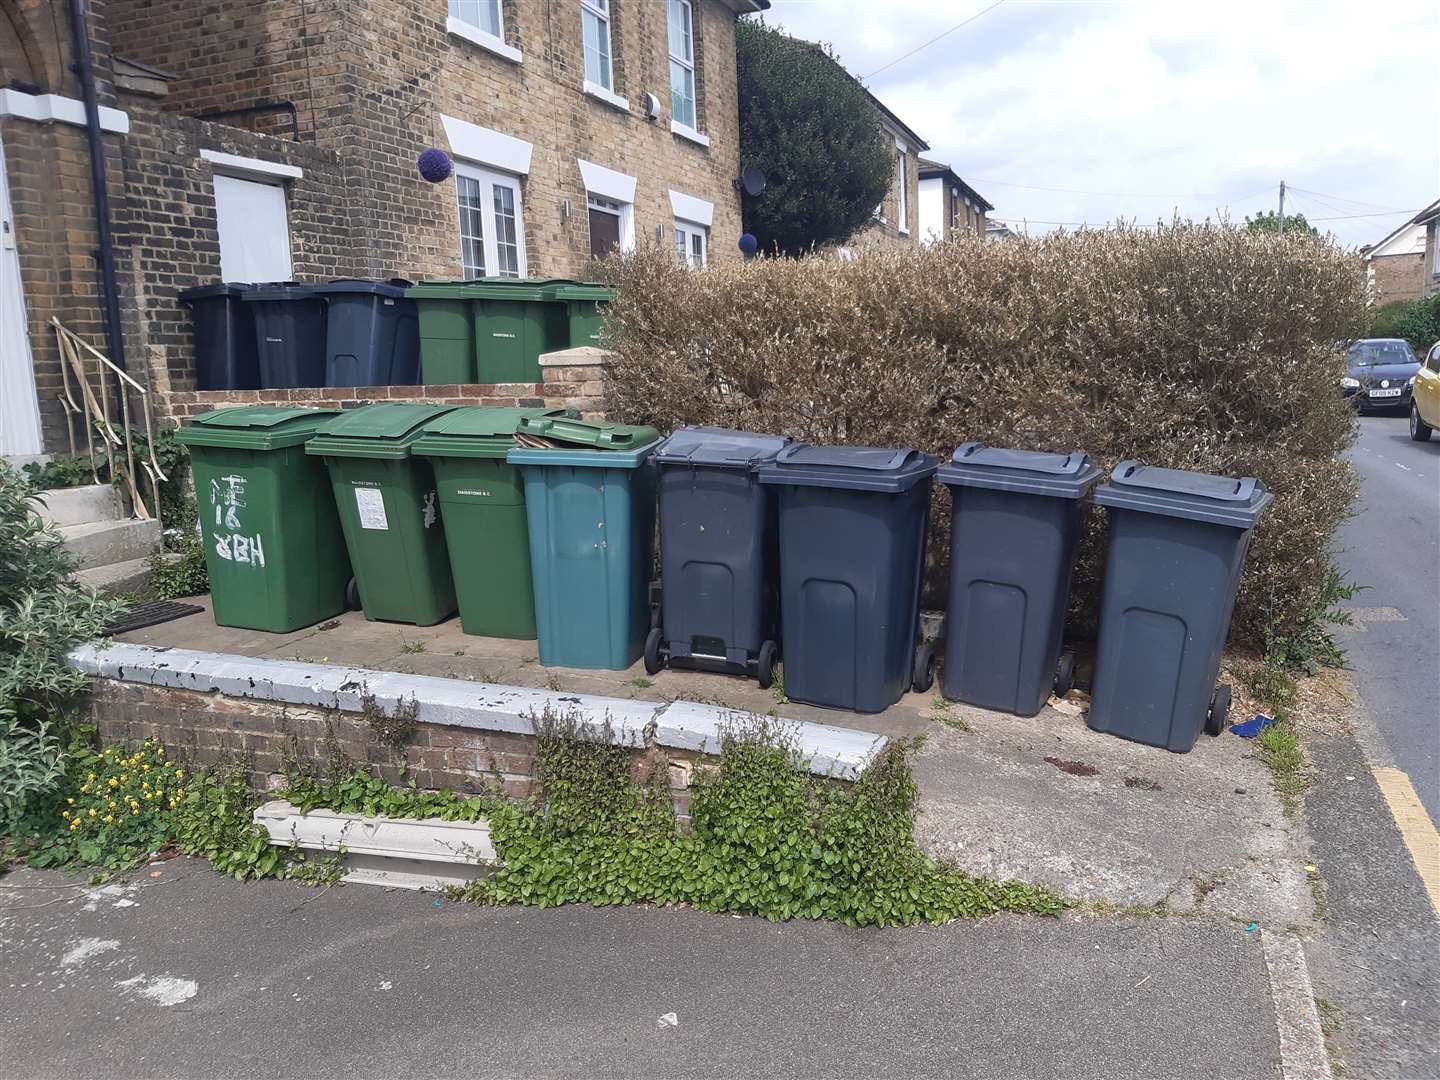 The councils collect from thousands of bins each week